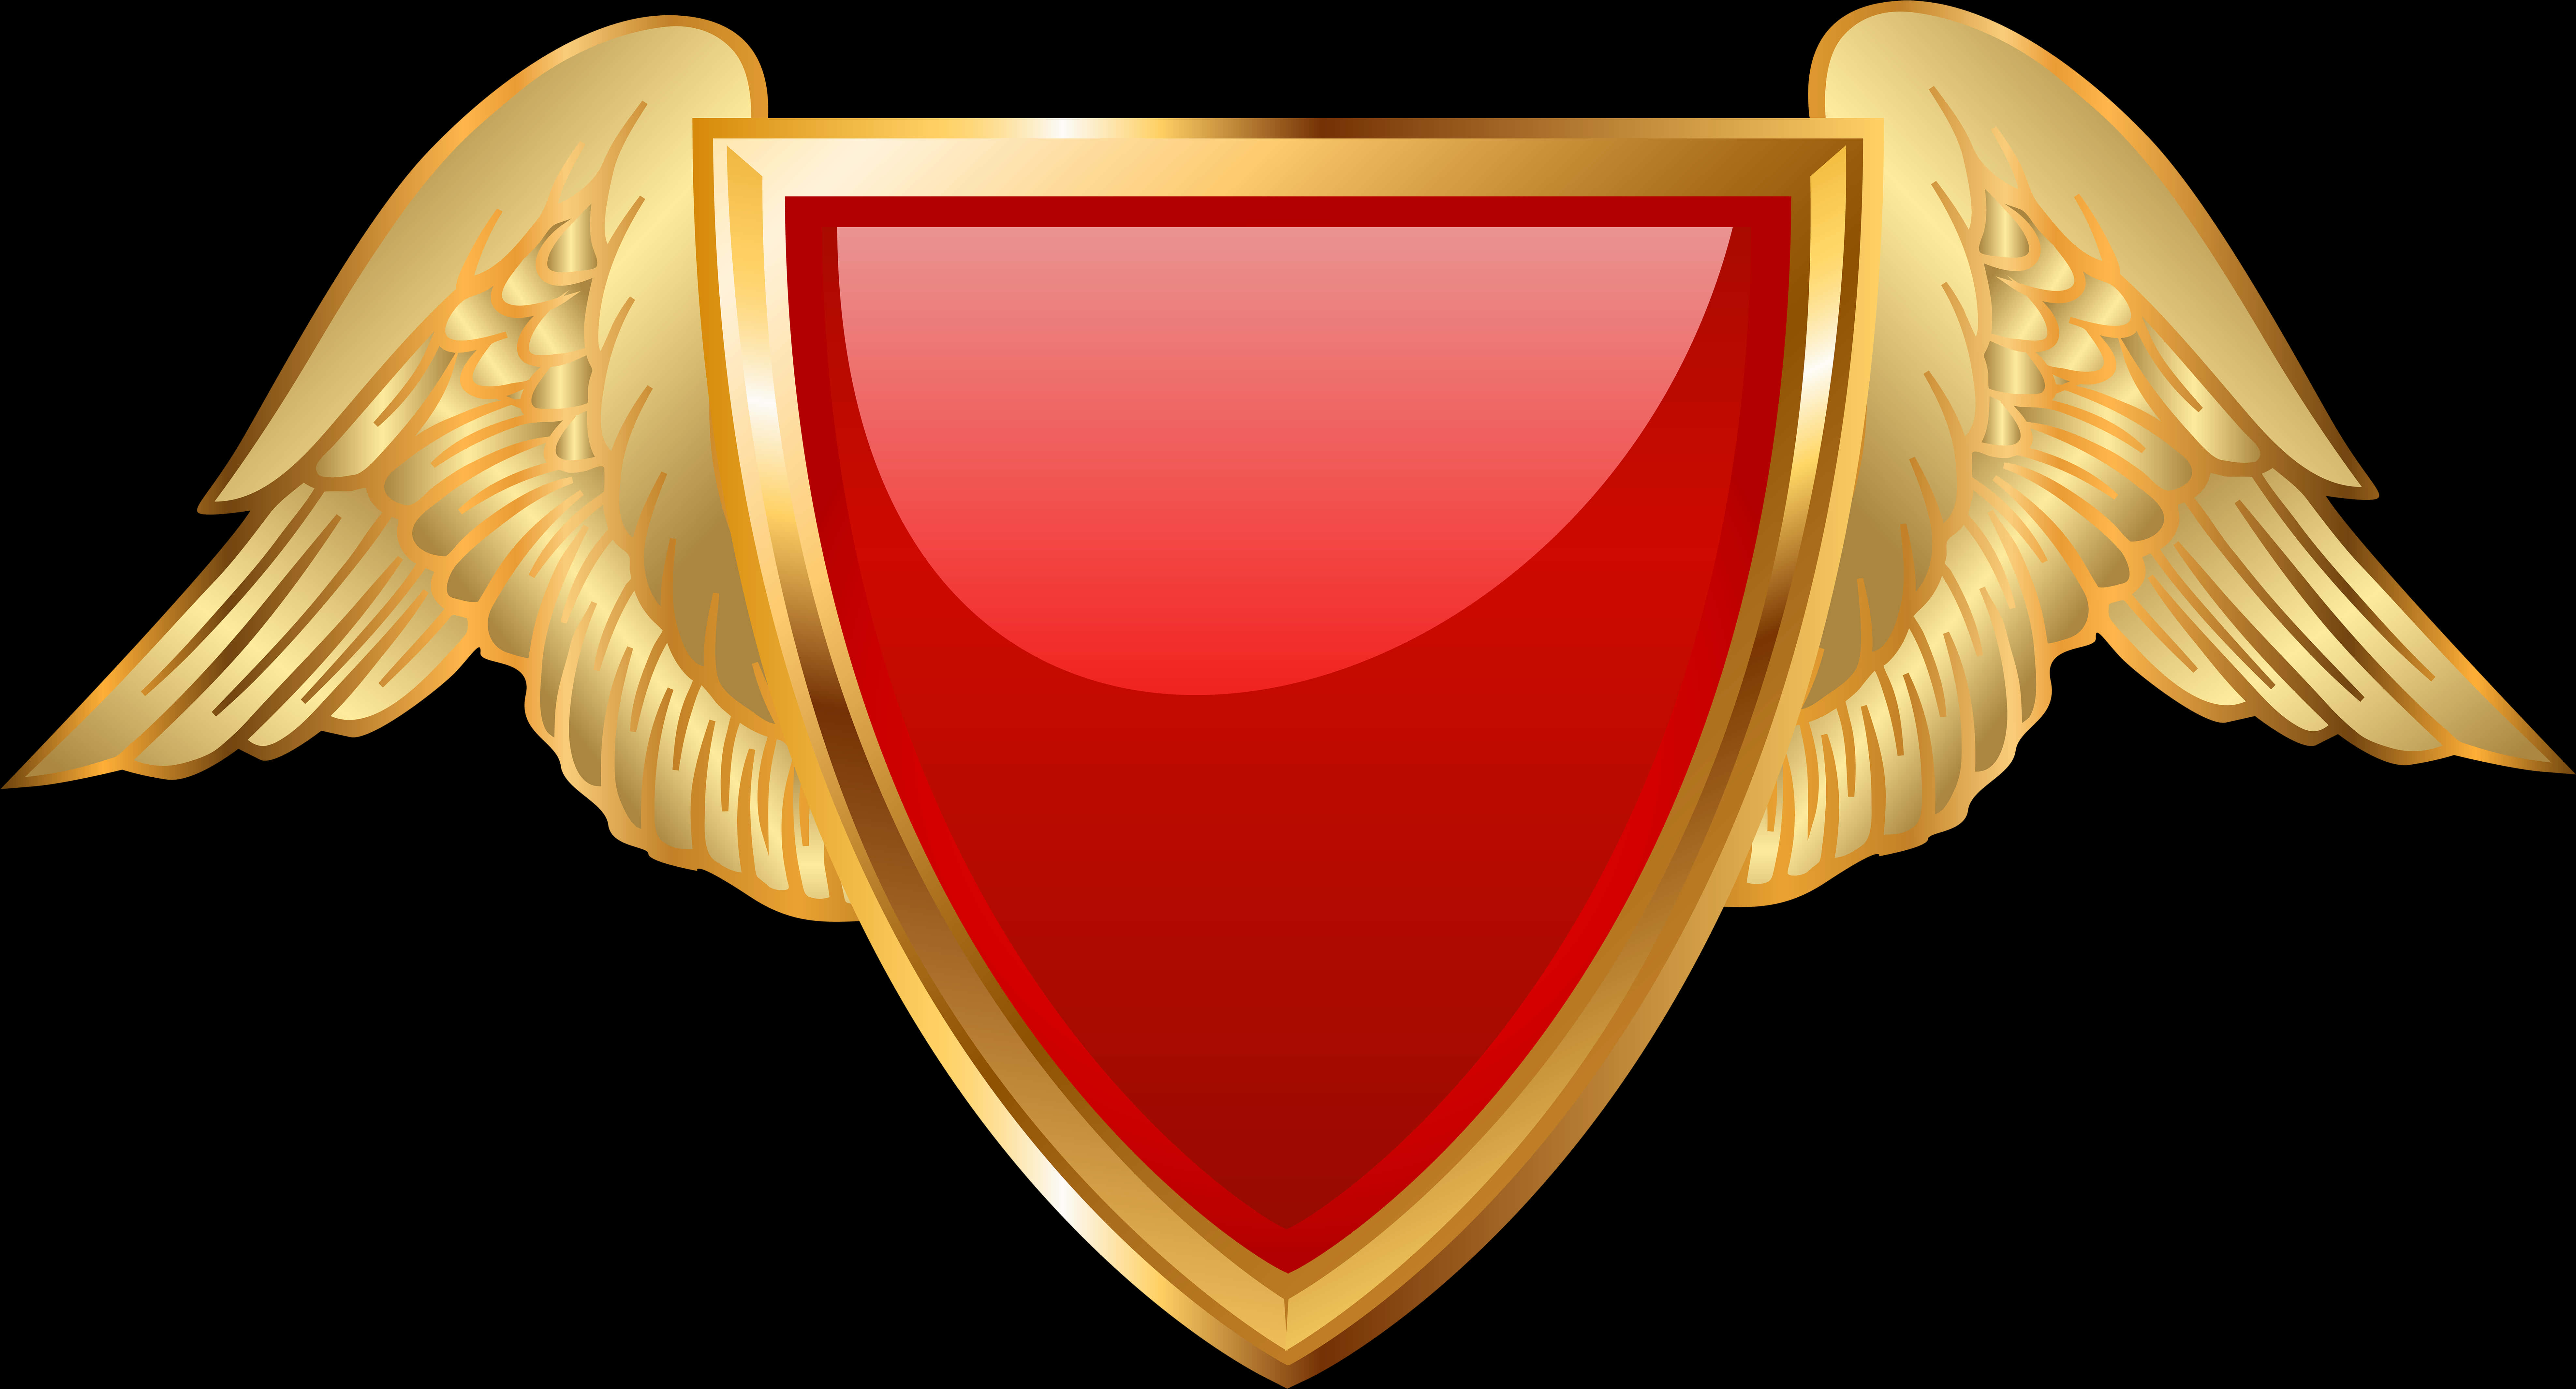 Golden Winged Shield Graphic PNG